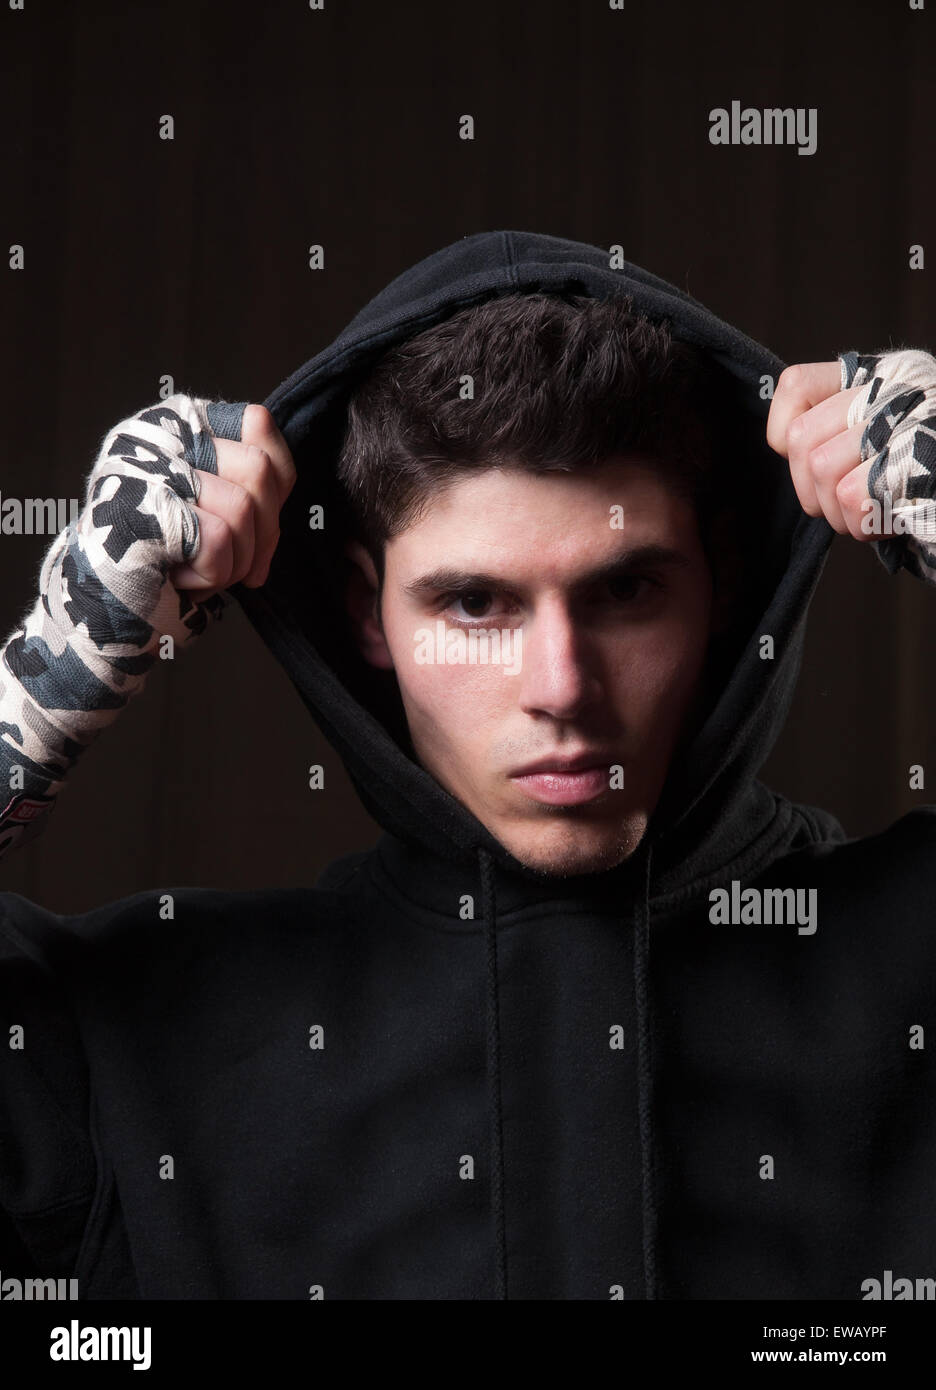 Boxer man with hoodie over dark background in a studio shot. Stock Photo